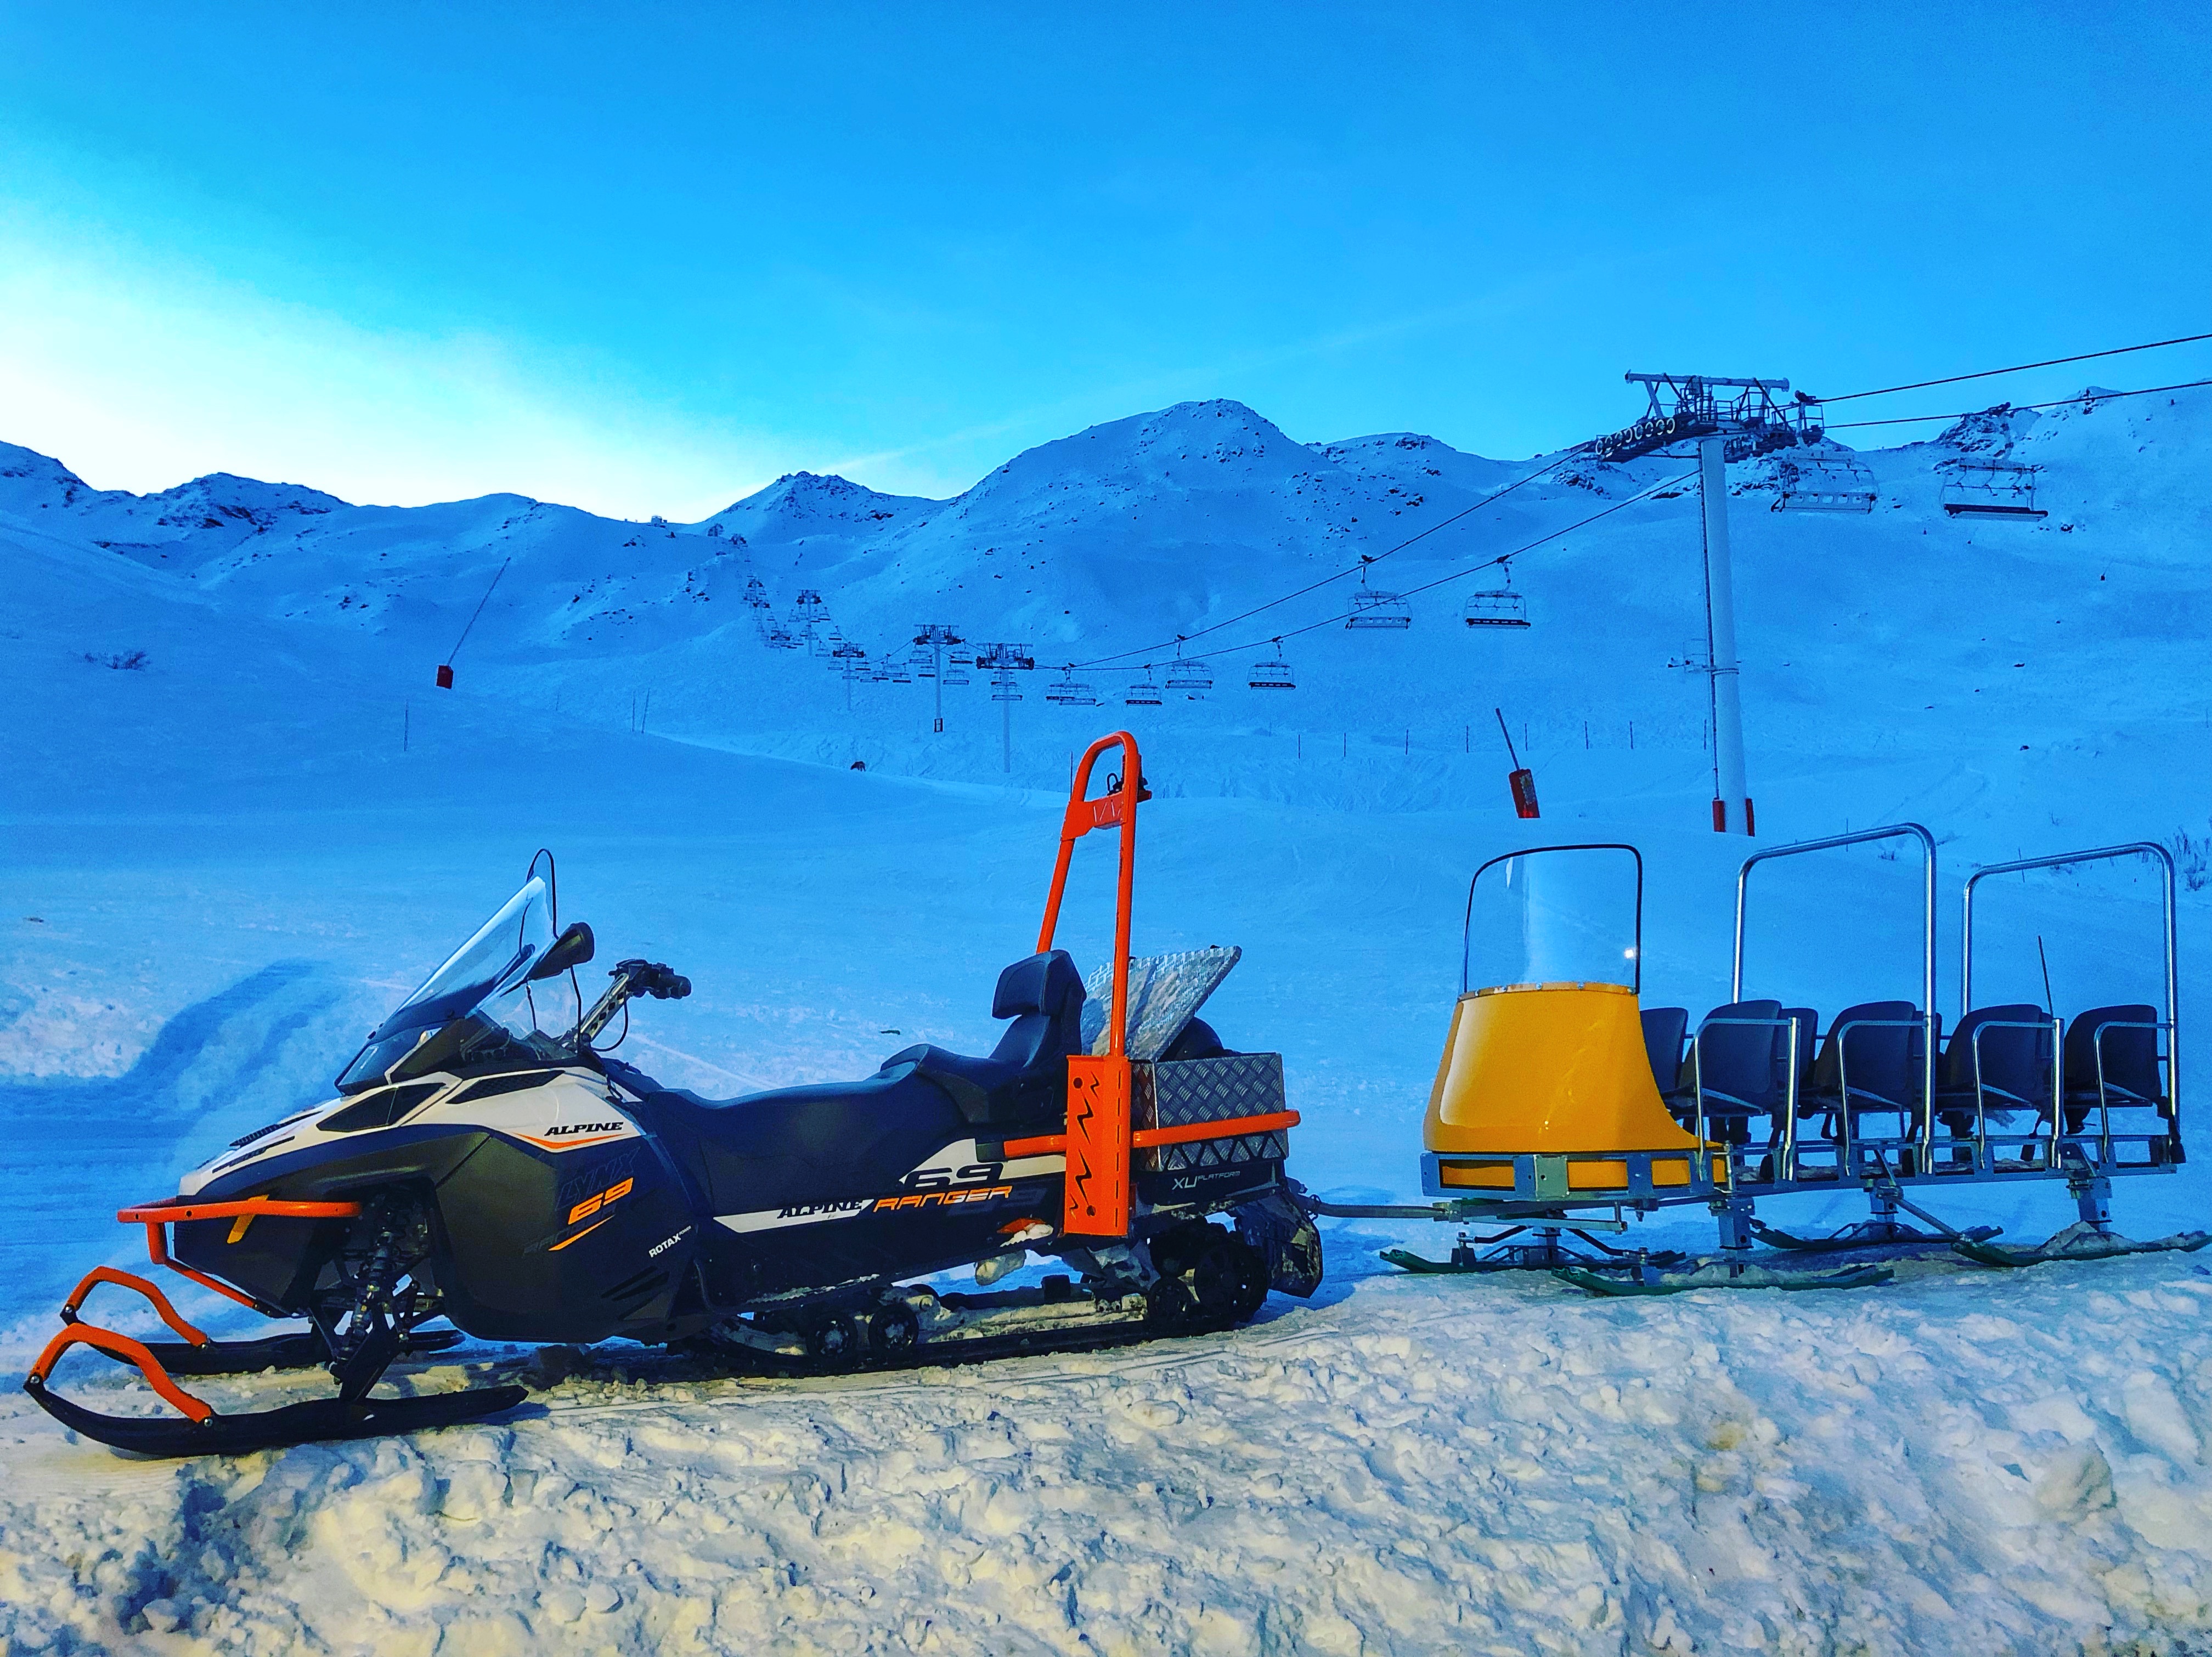 Your arrival in Val Thorens